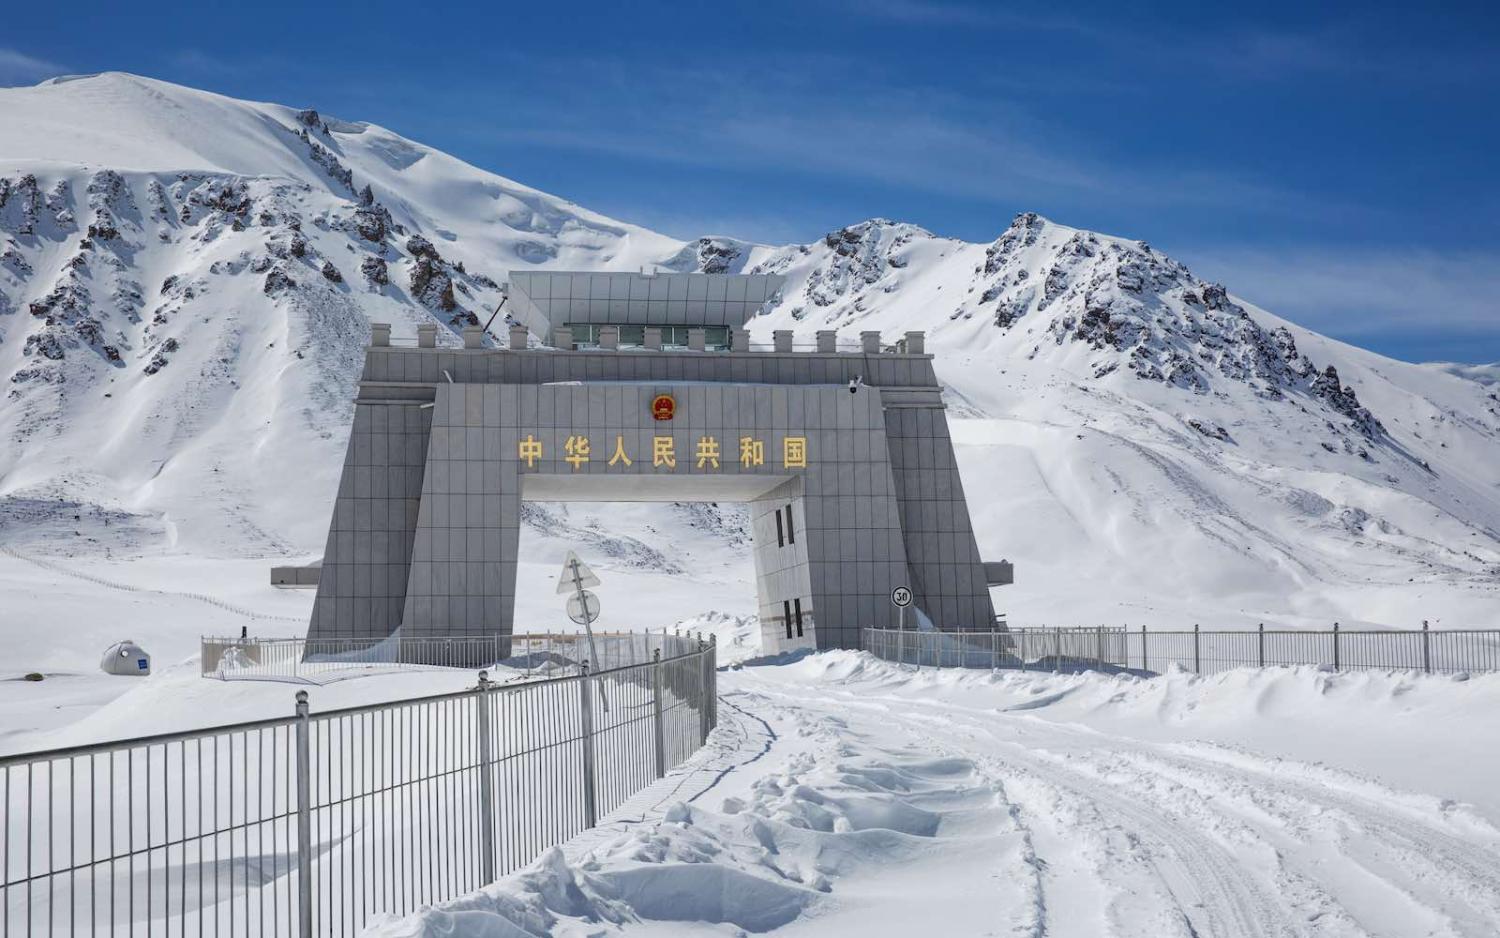 The Khunjerab Pass at the border of China and Pakistan on the Karakoram Highway (Getty Images)